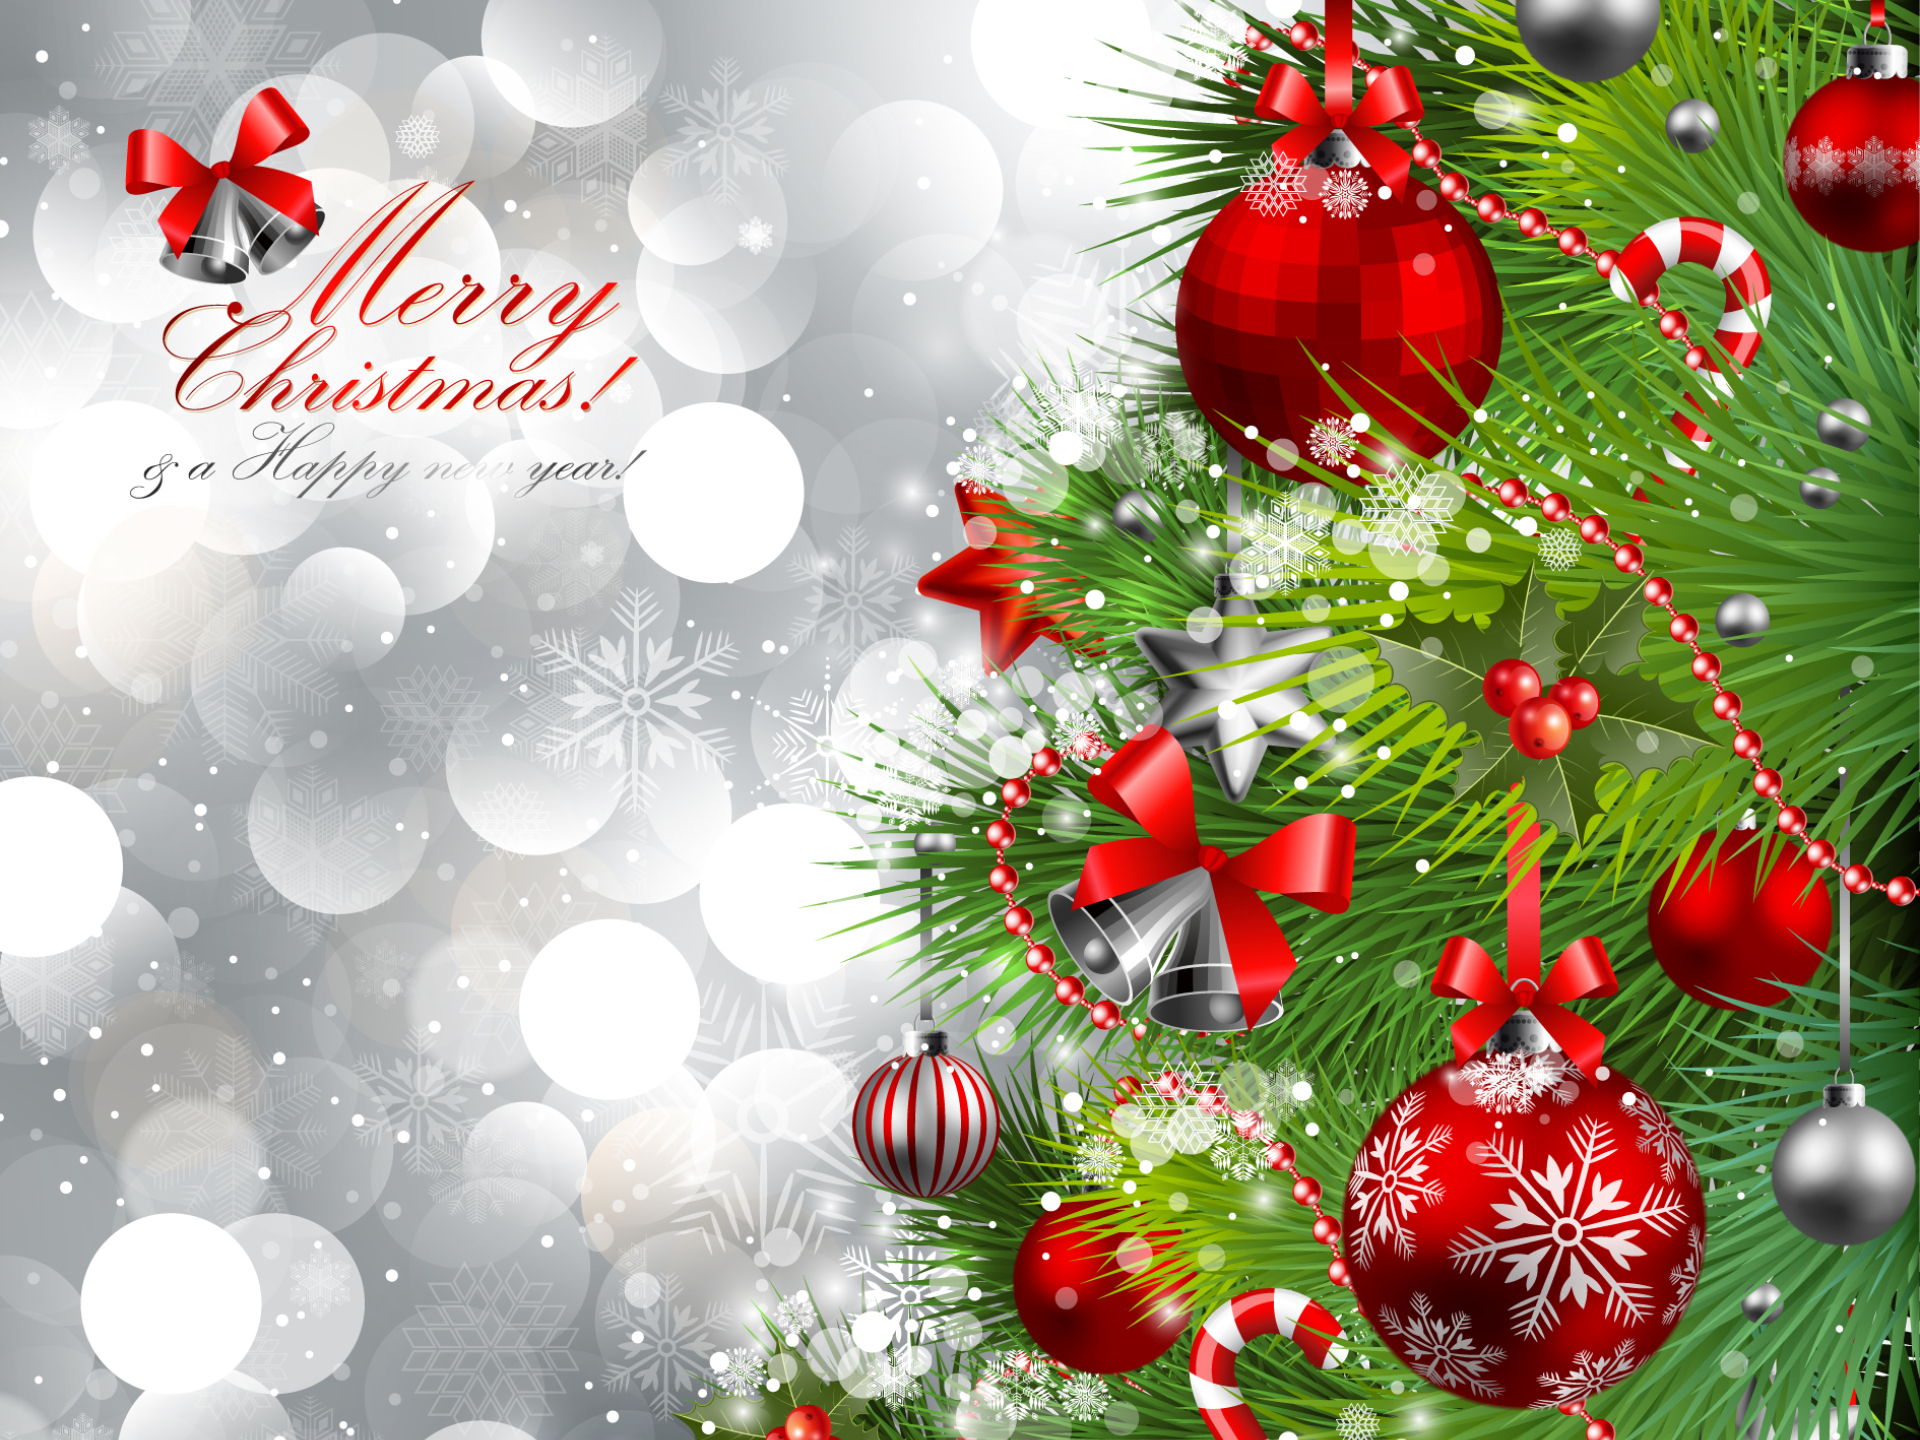 Merry Christmas Backgrounds